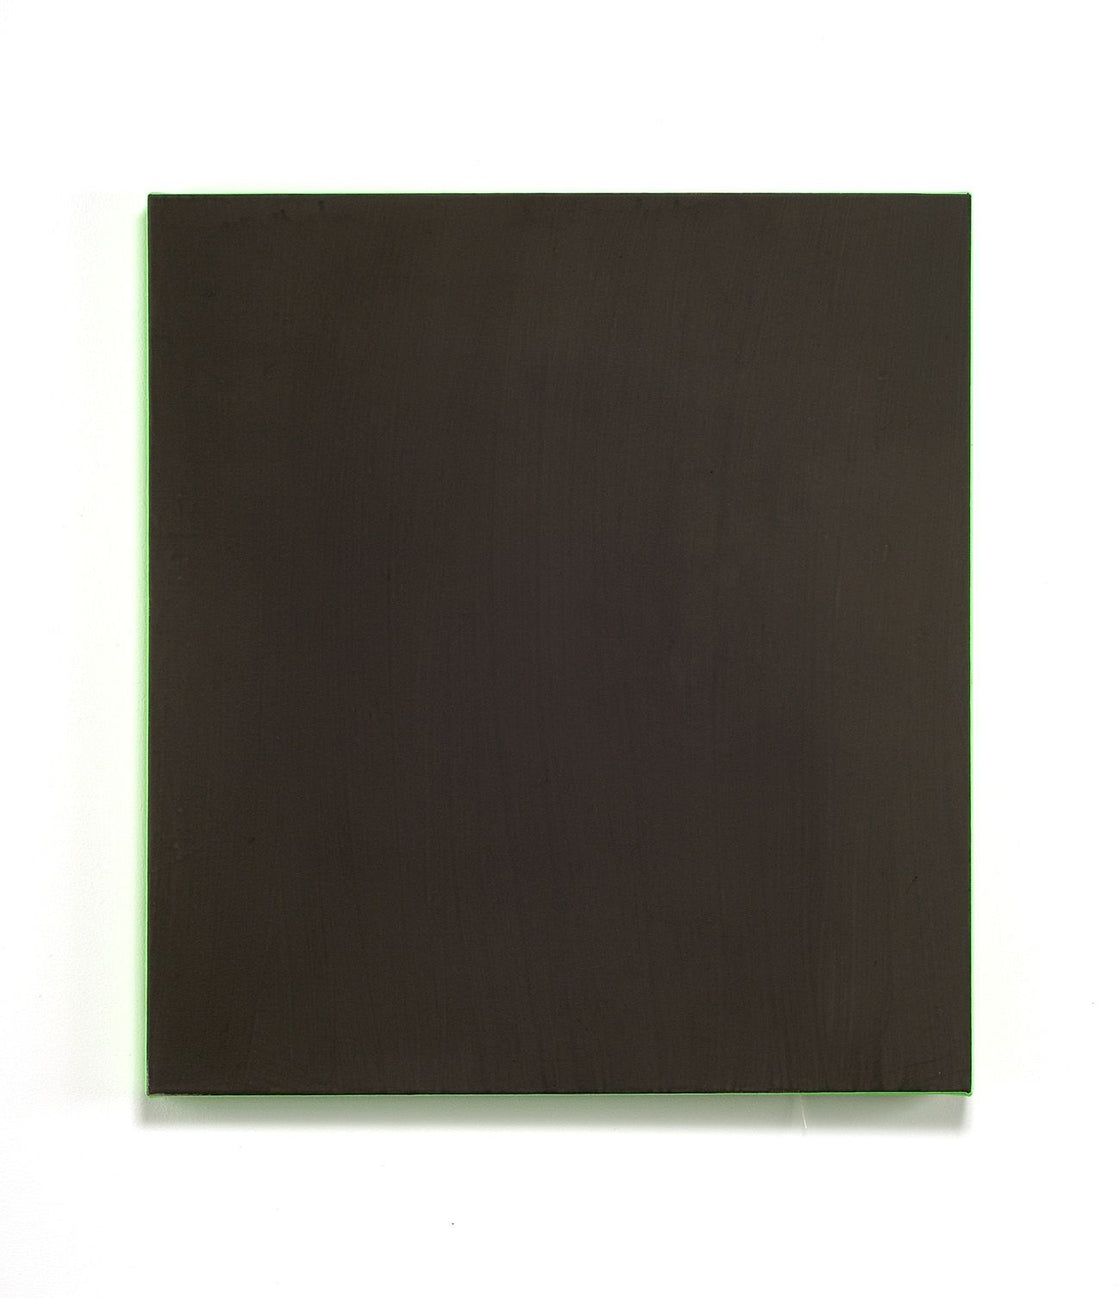 Painting 14, 2008